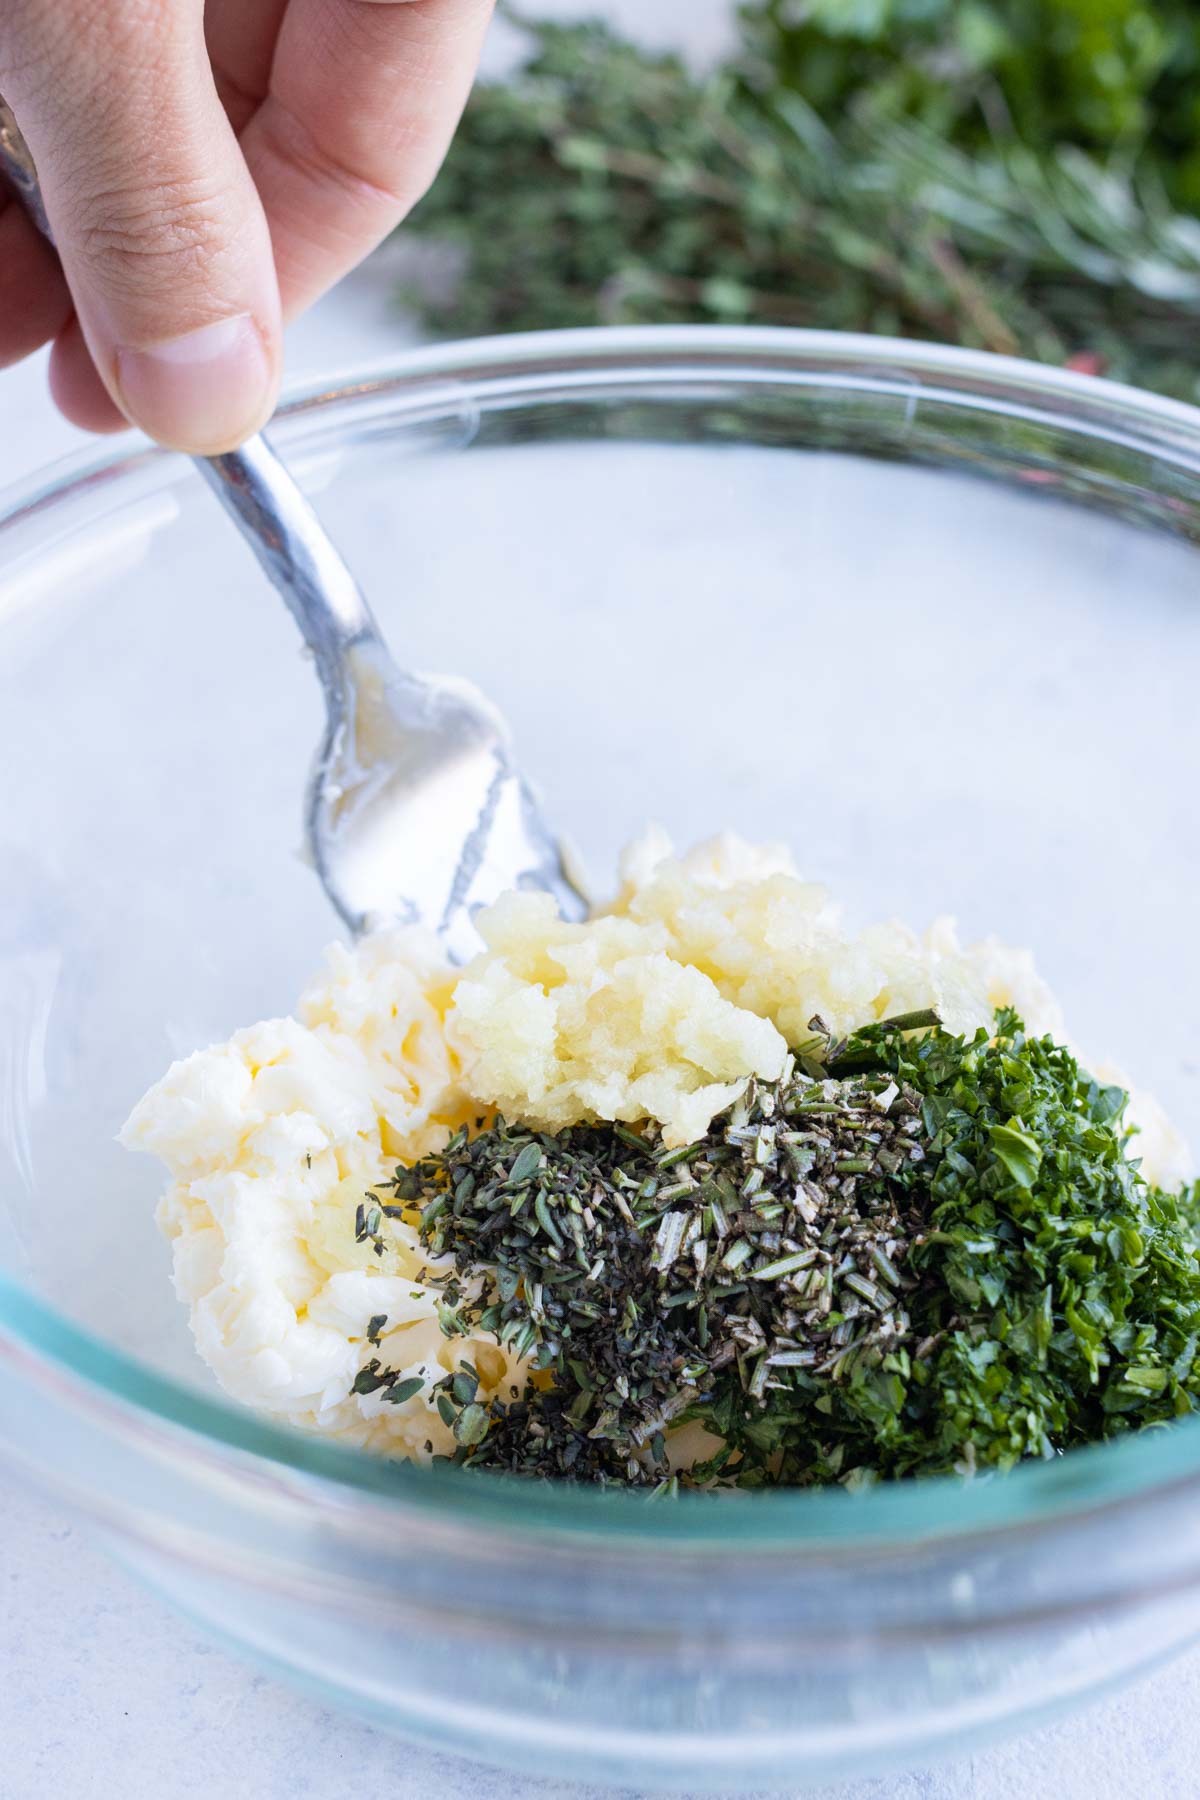 Herbs, garlic, salt, and pepper are added to the butter.